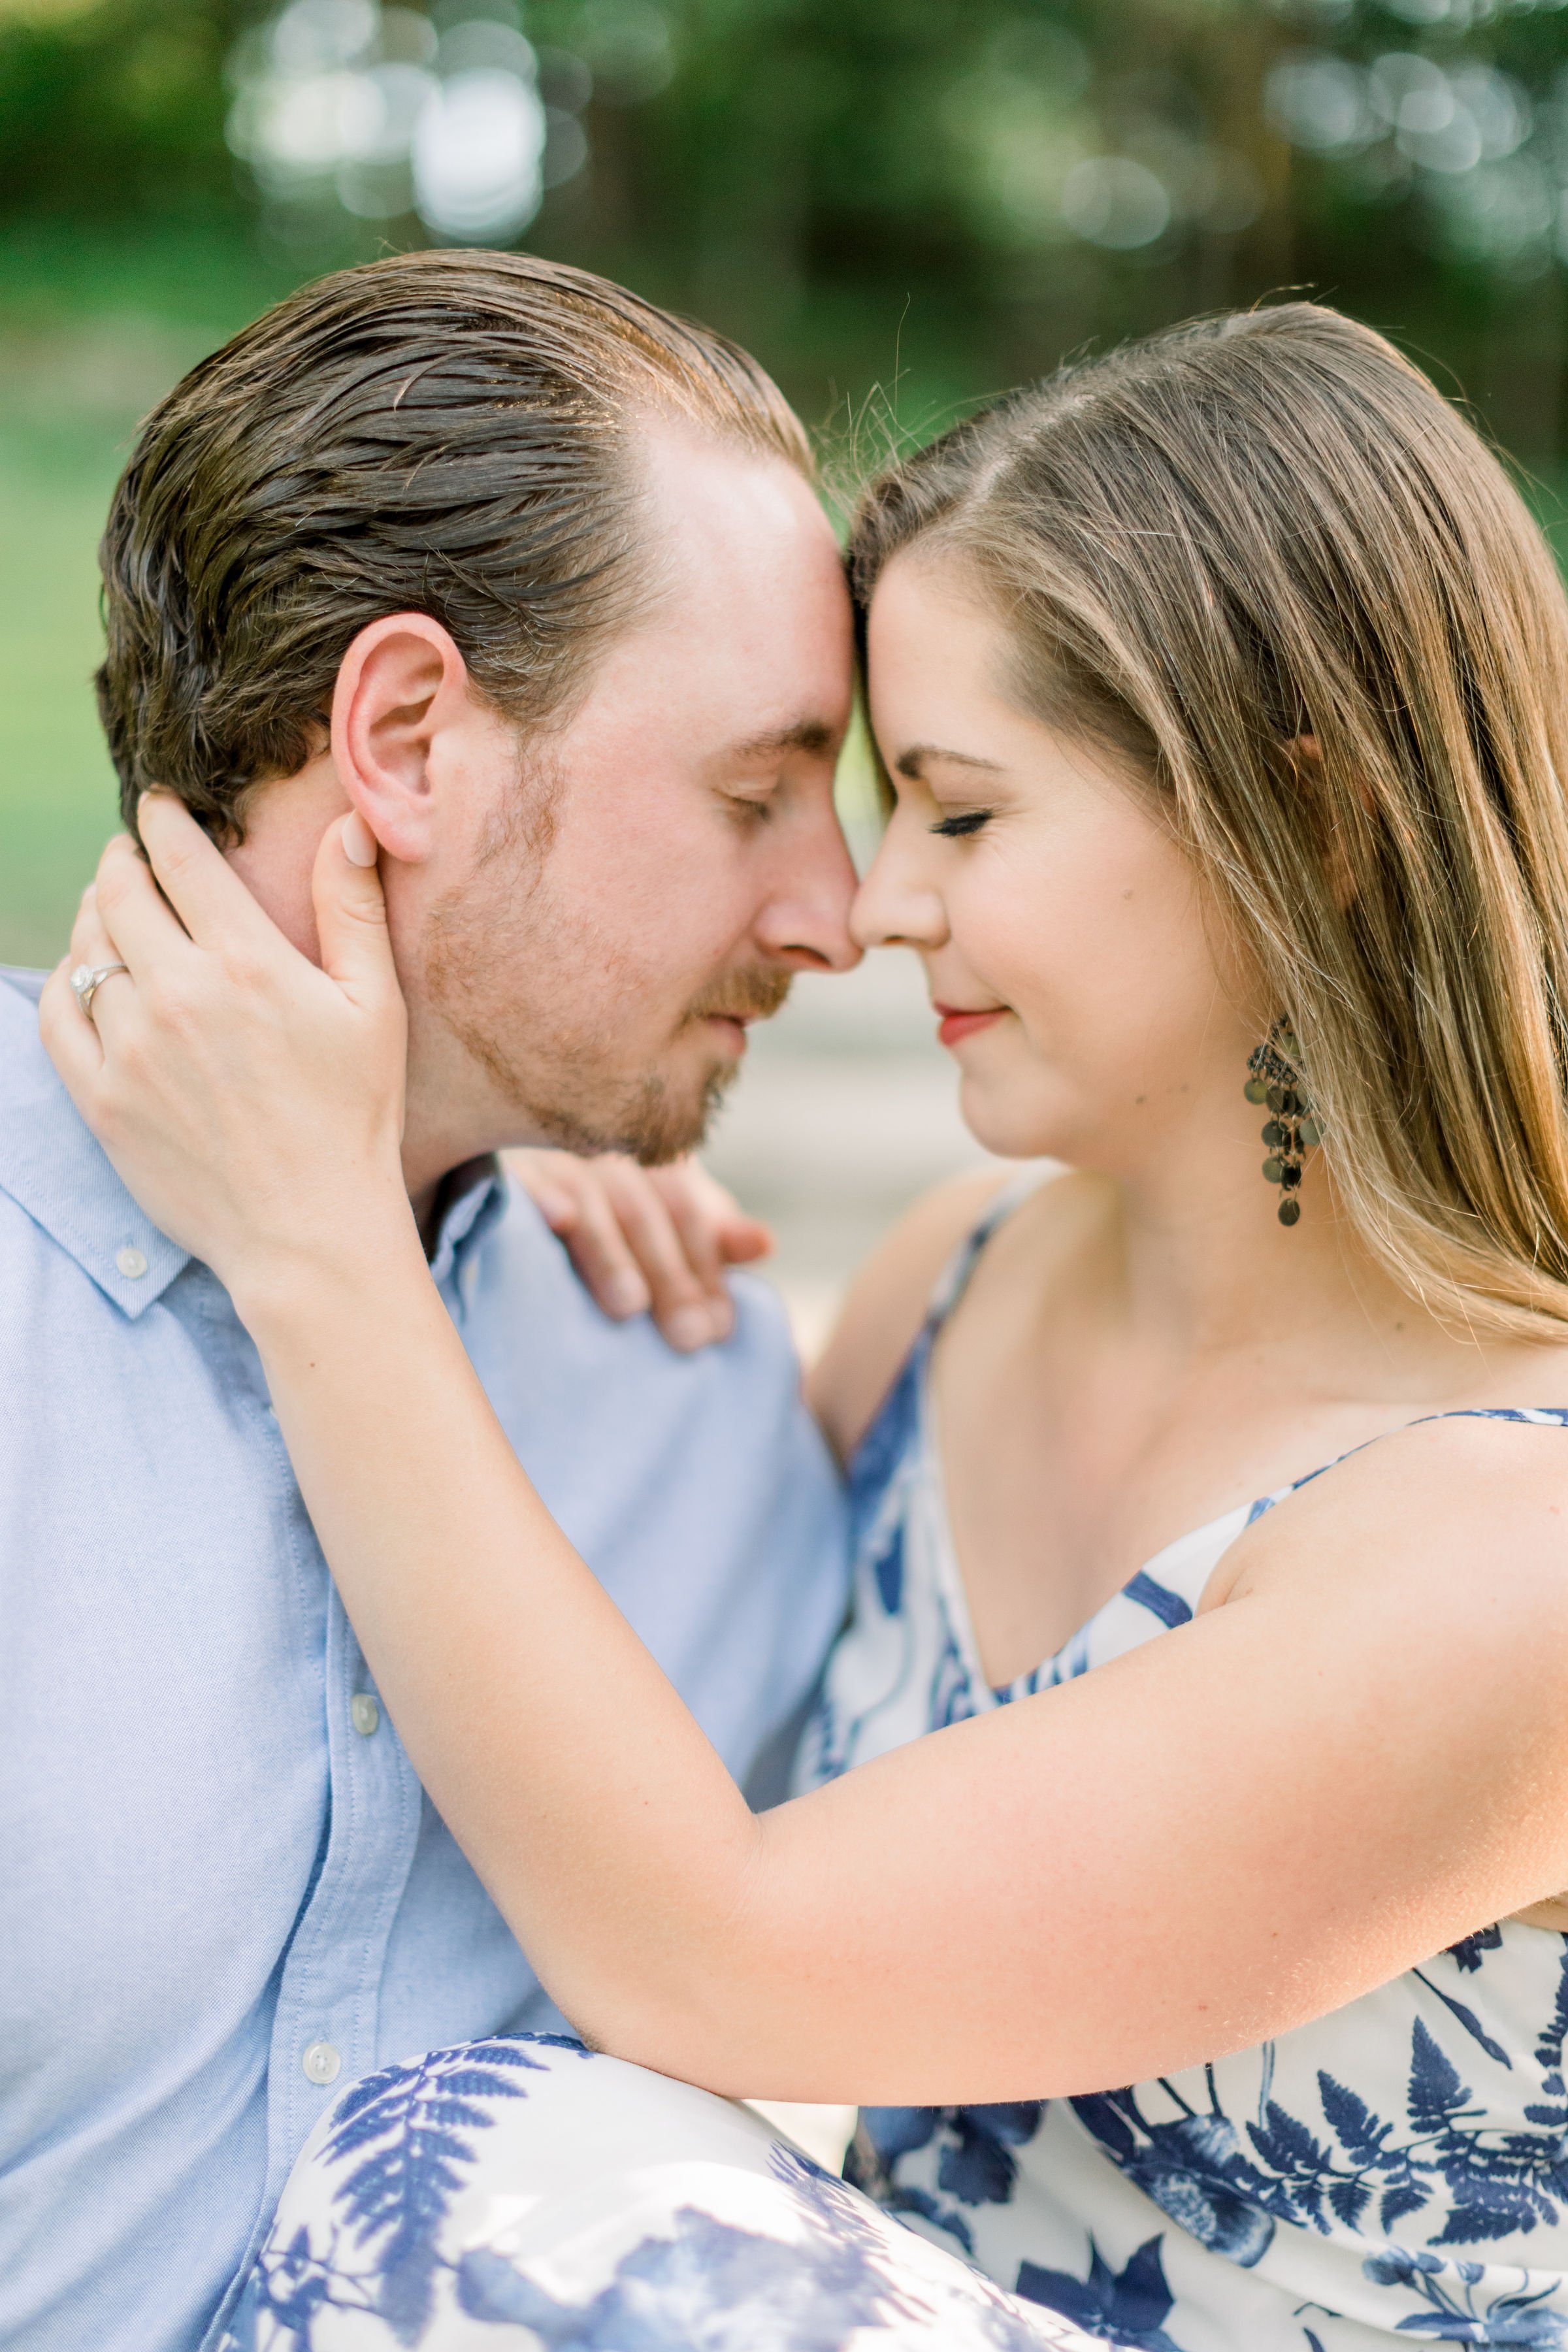  During an engagement session with Chelsea Mason Photography, a couple closes their eyes and has their heads together. forehead together #chelseamasonphotography #chelseamasonengagements #Ottawaengagments #Almonteengagementphoto #outdoorengagments 